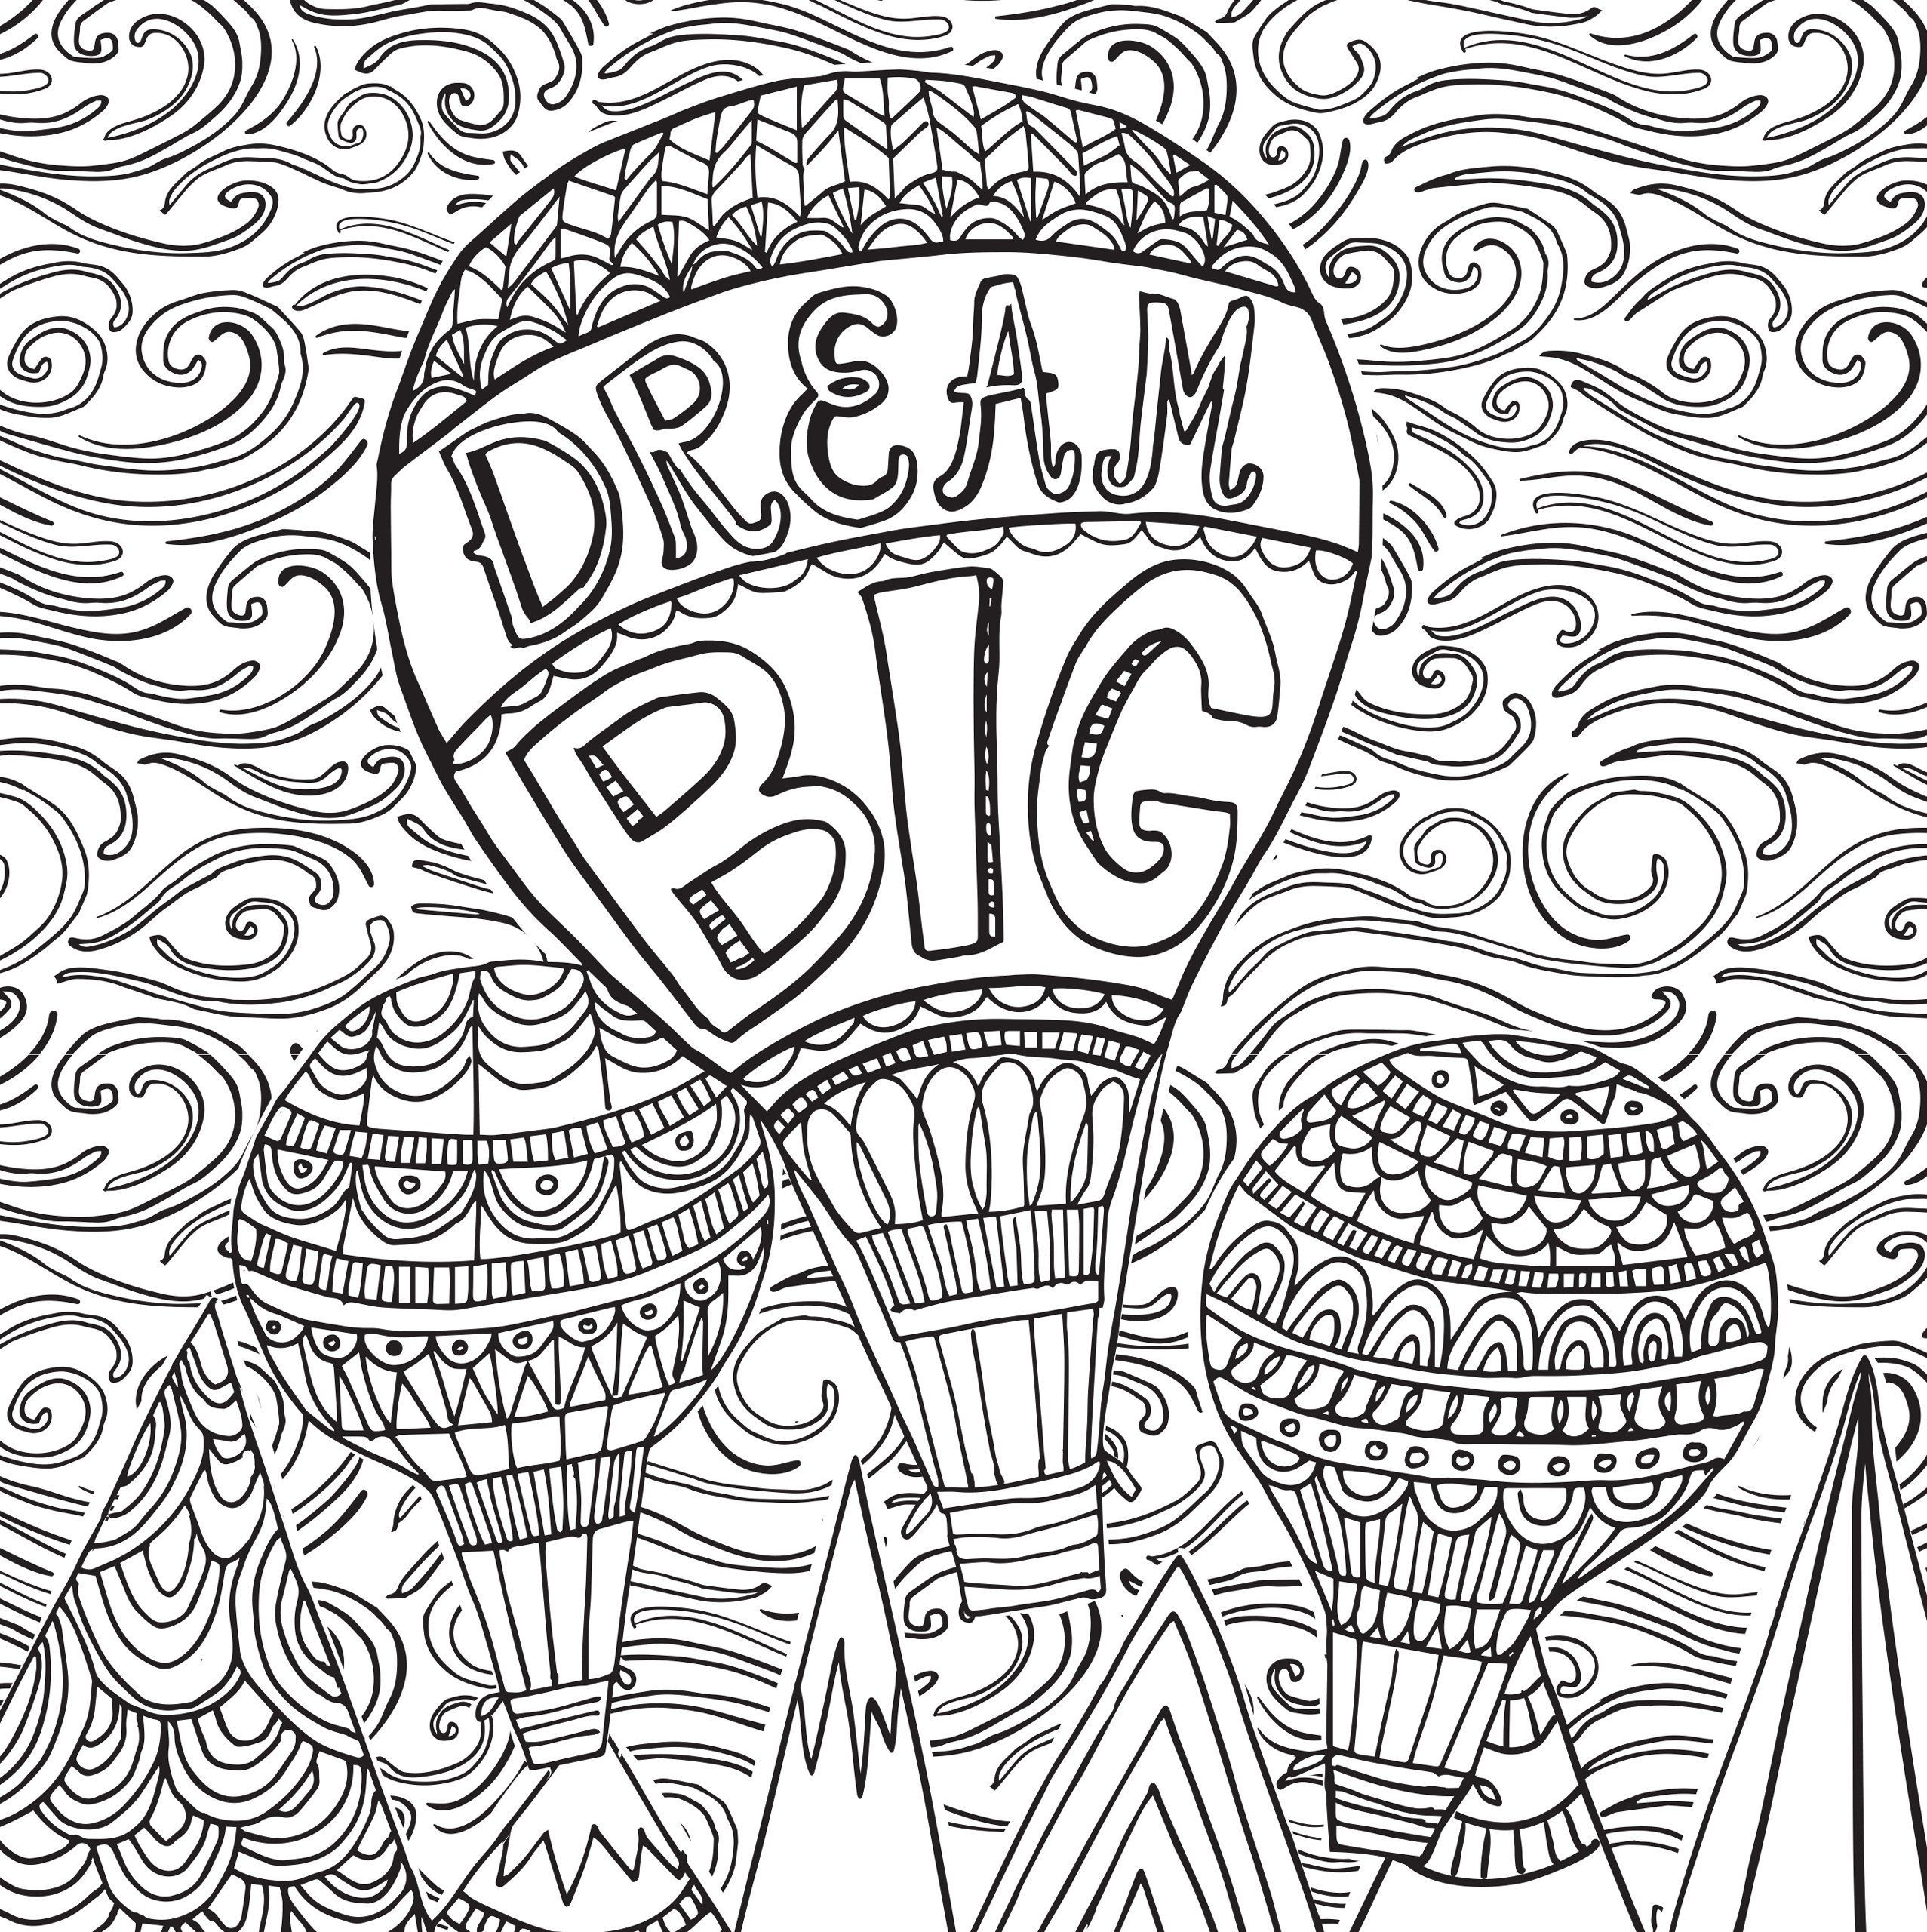 Inspirational Coloring Pages For Kids
 Joyful Inspiration Adult Coloring Book 31 stress